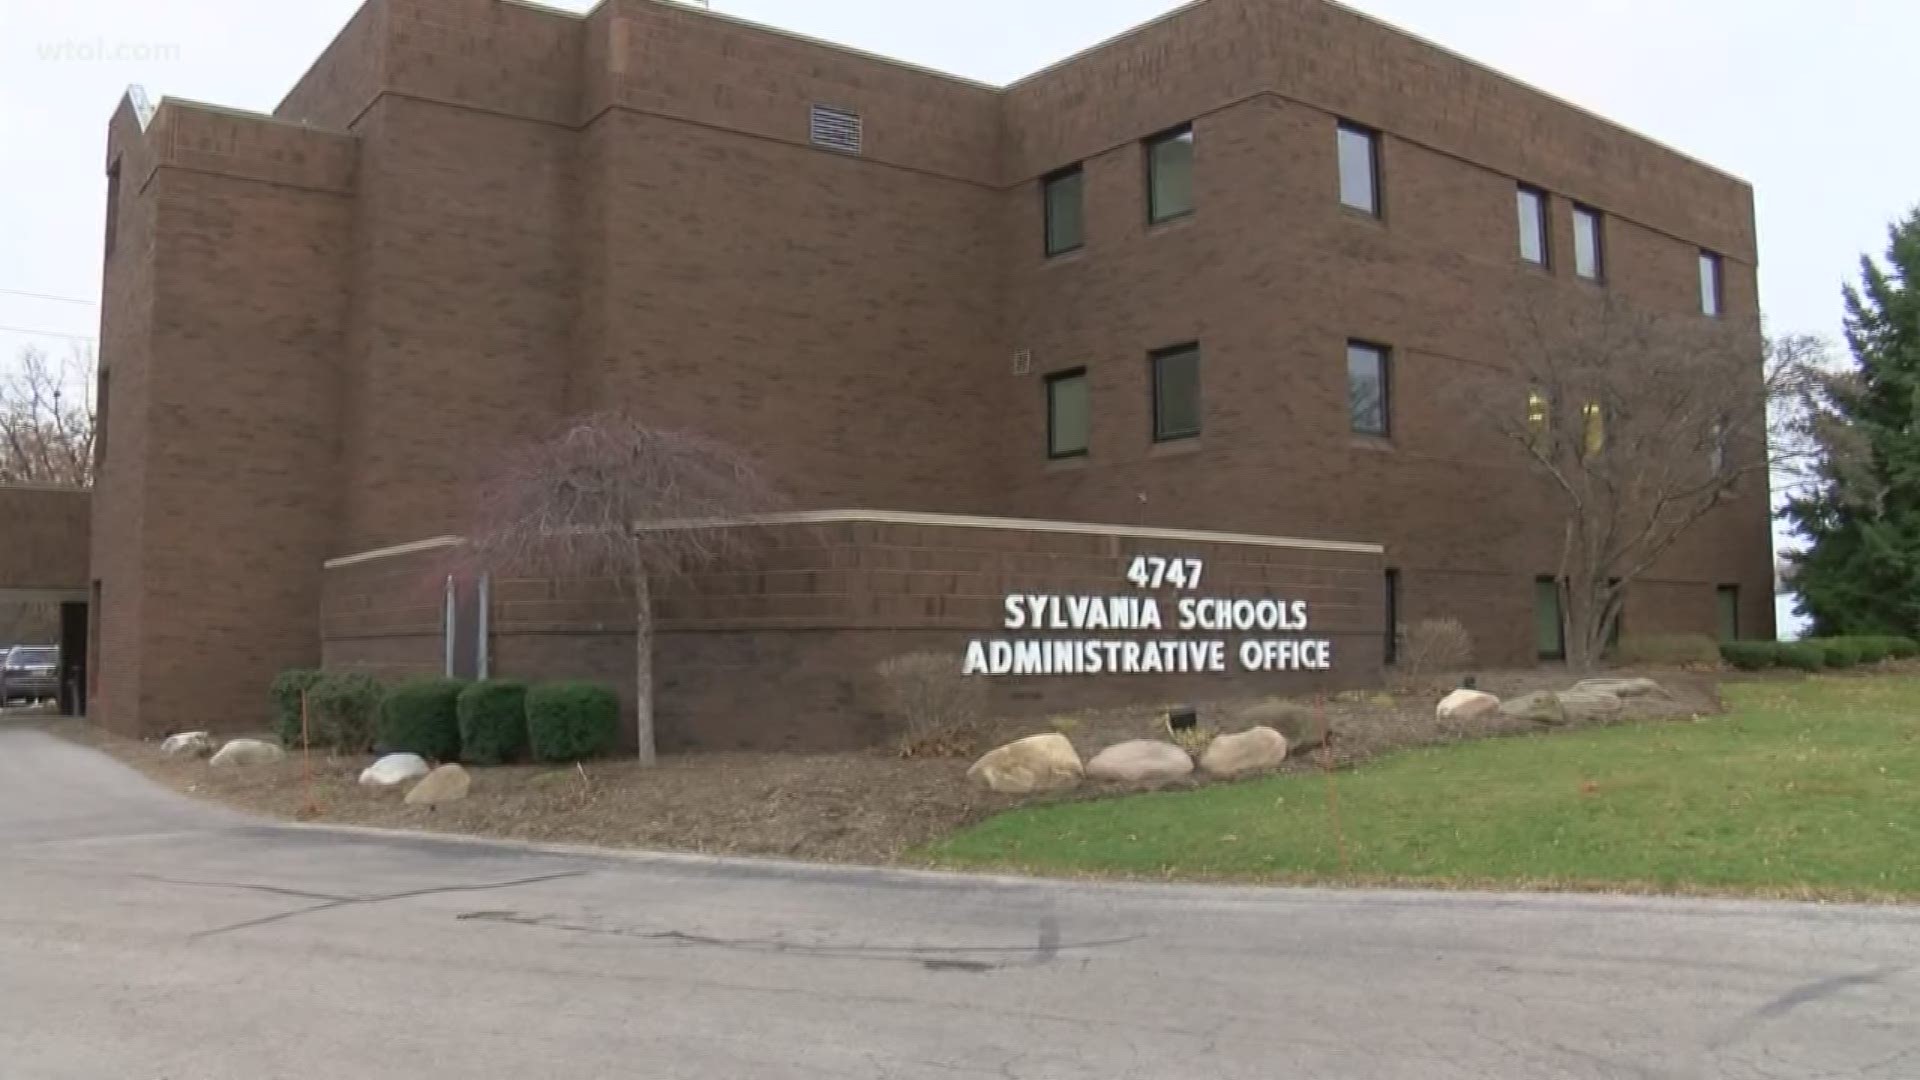 Officials with Sylvania Schools are already looking for a new superintendent. Now, they have another high-profile vacancy to fill.